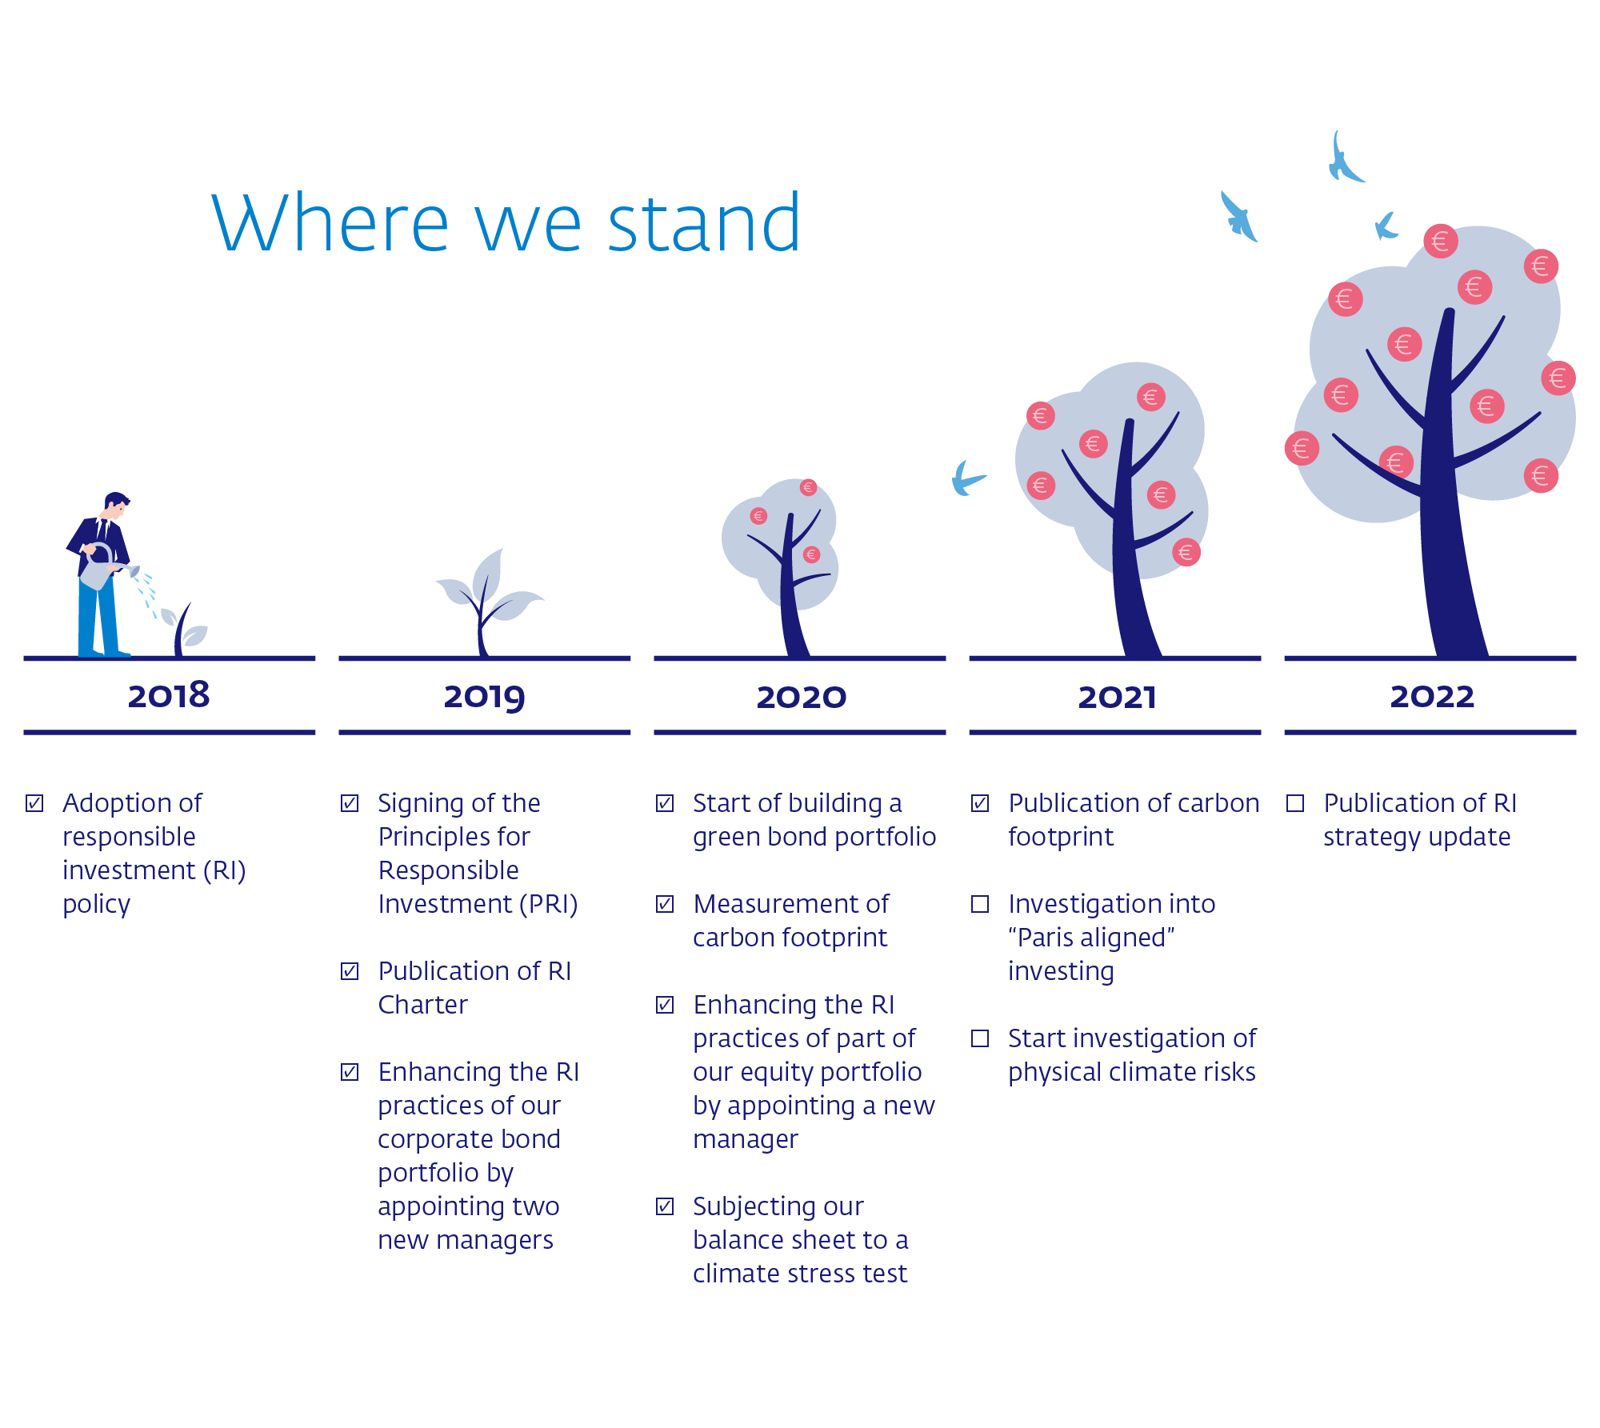 Infographic about where we stand with the adoption of responsible investment policy